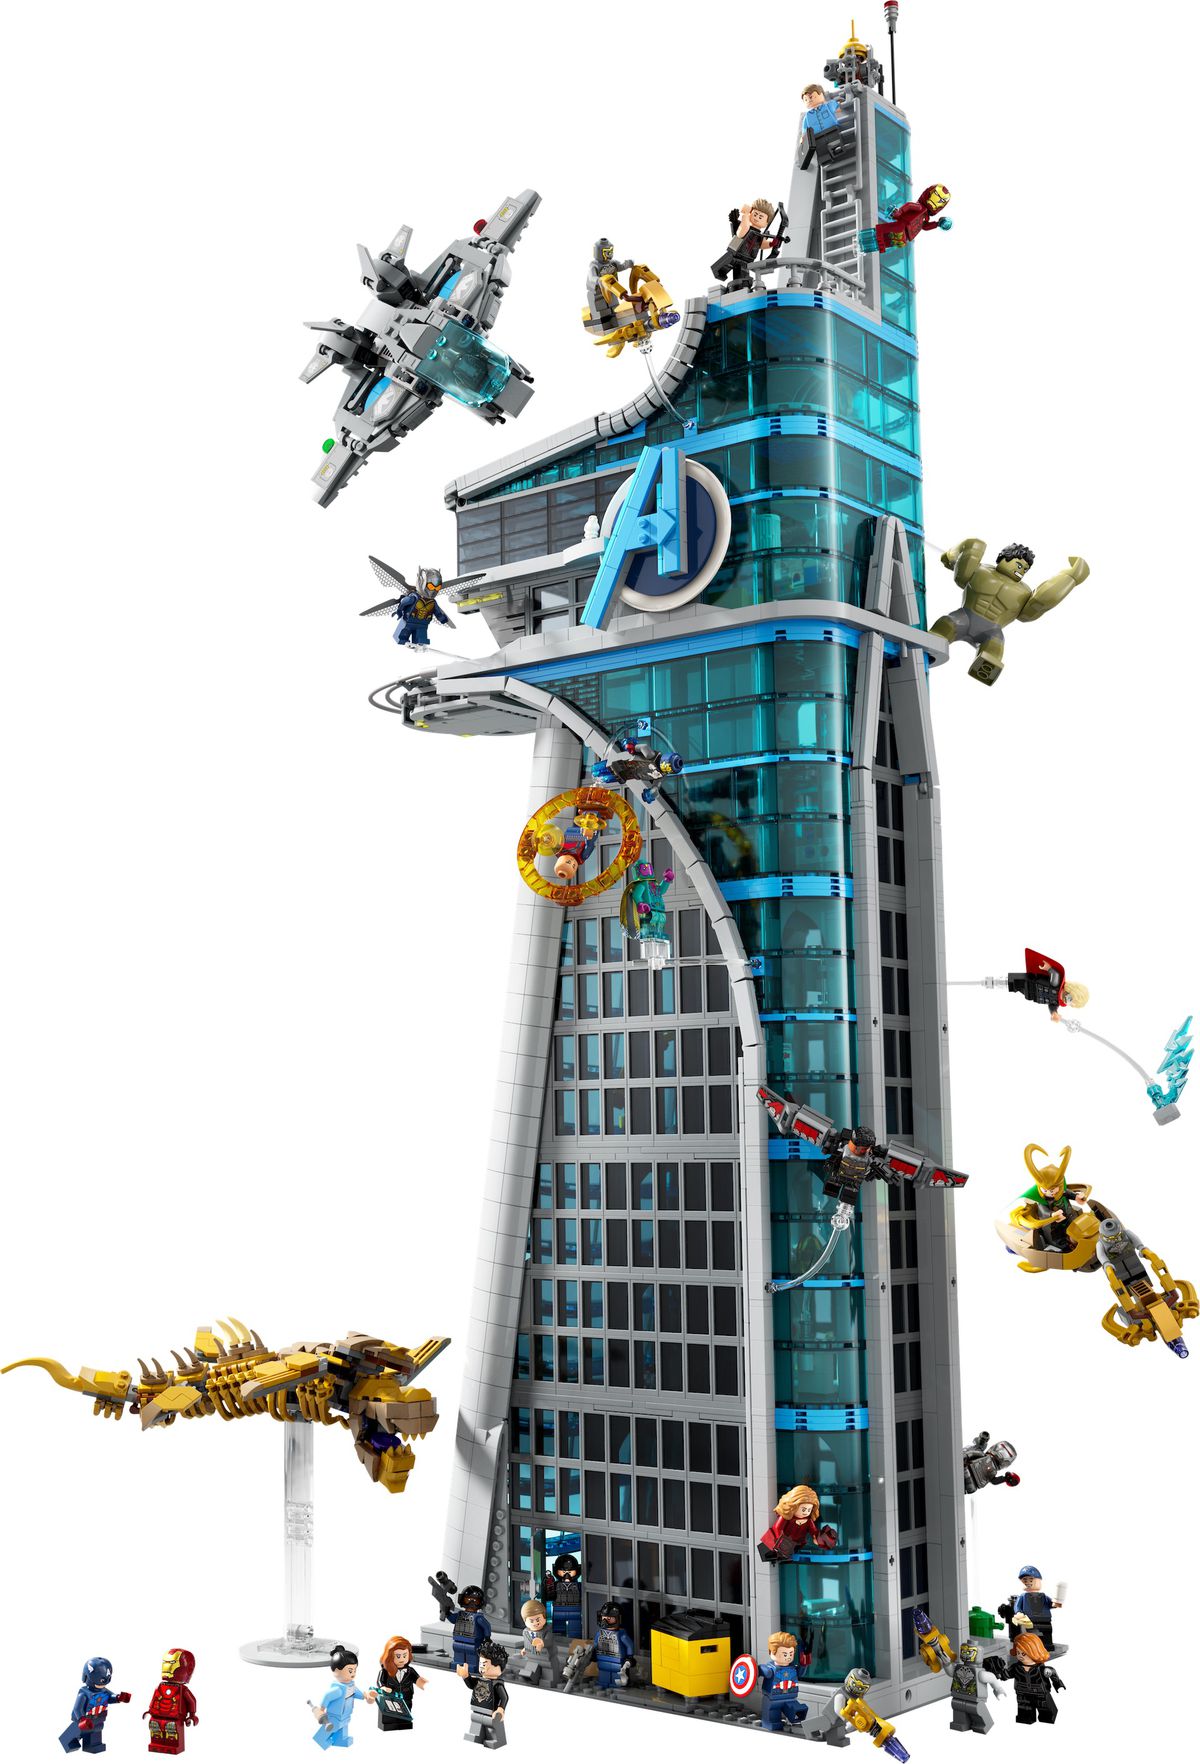 A product shot of Lego Avengers Tower, showing various Avengers and Chitauri forces battling on the exterior